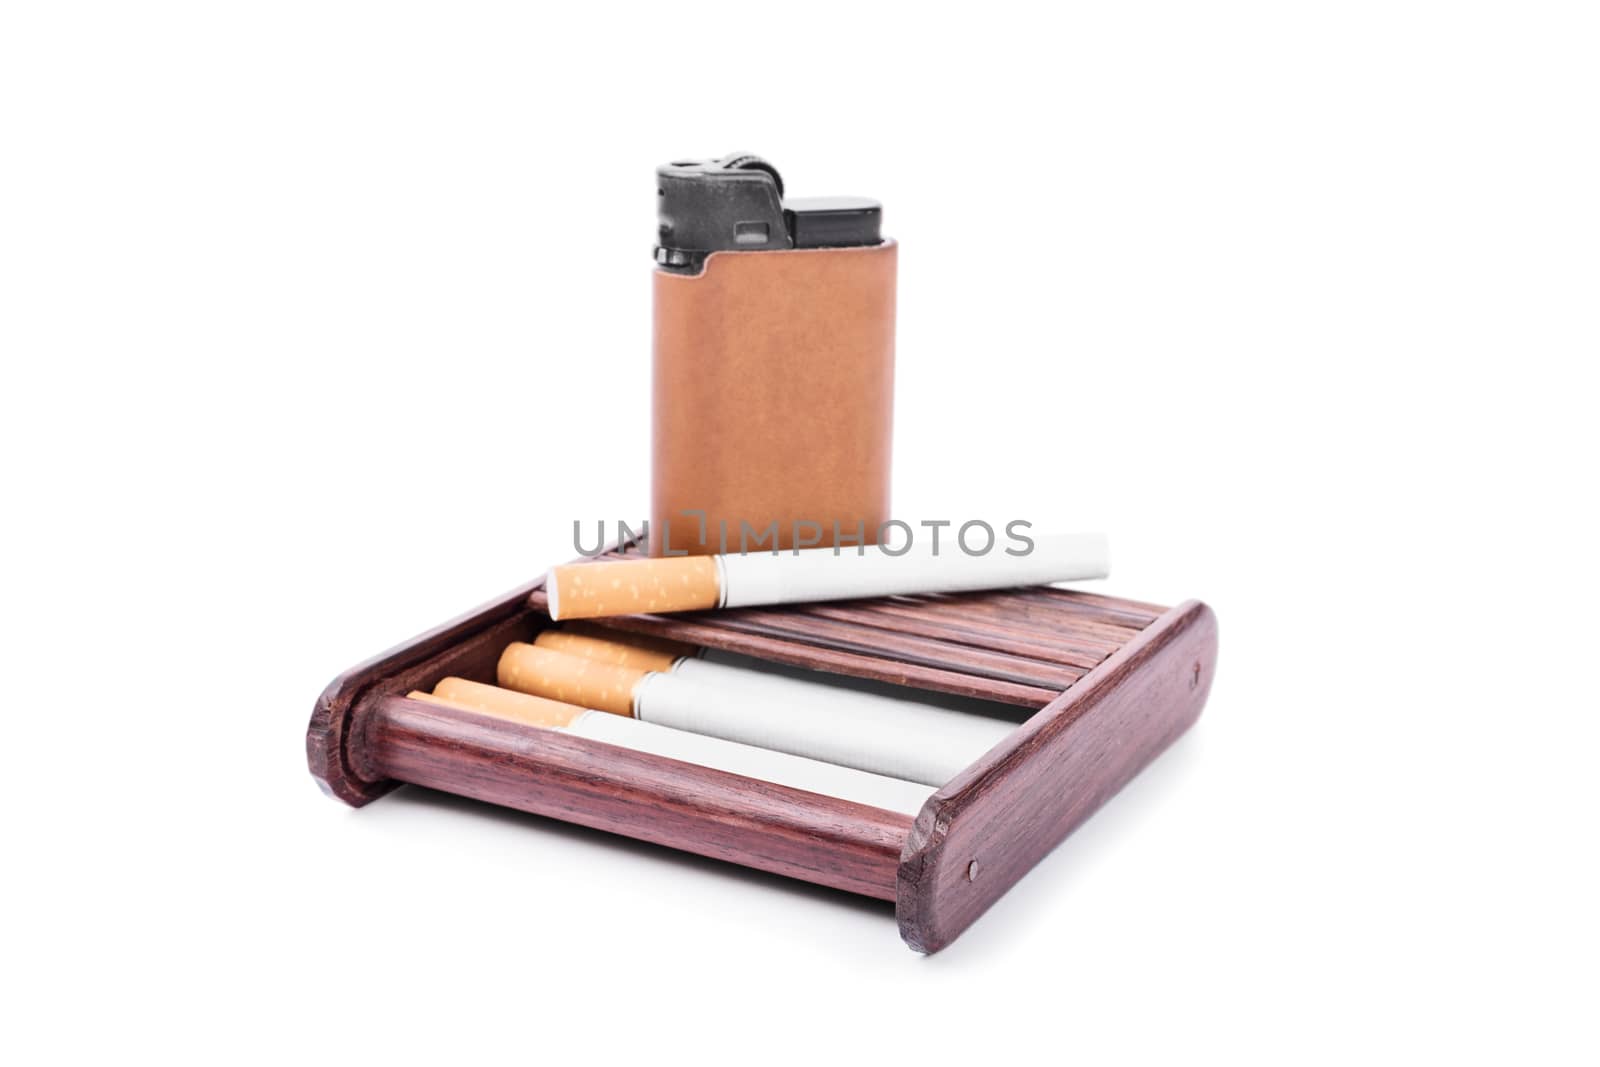 Cigarette case with a lighter by Mendelex